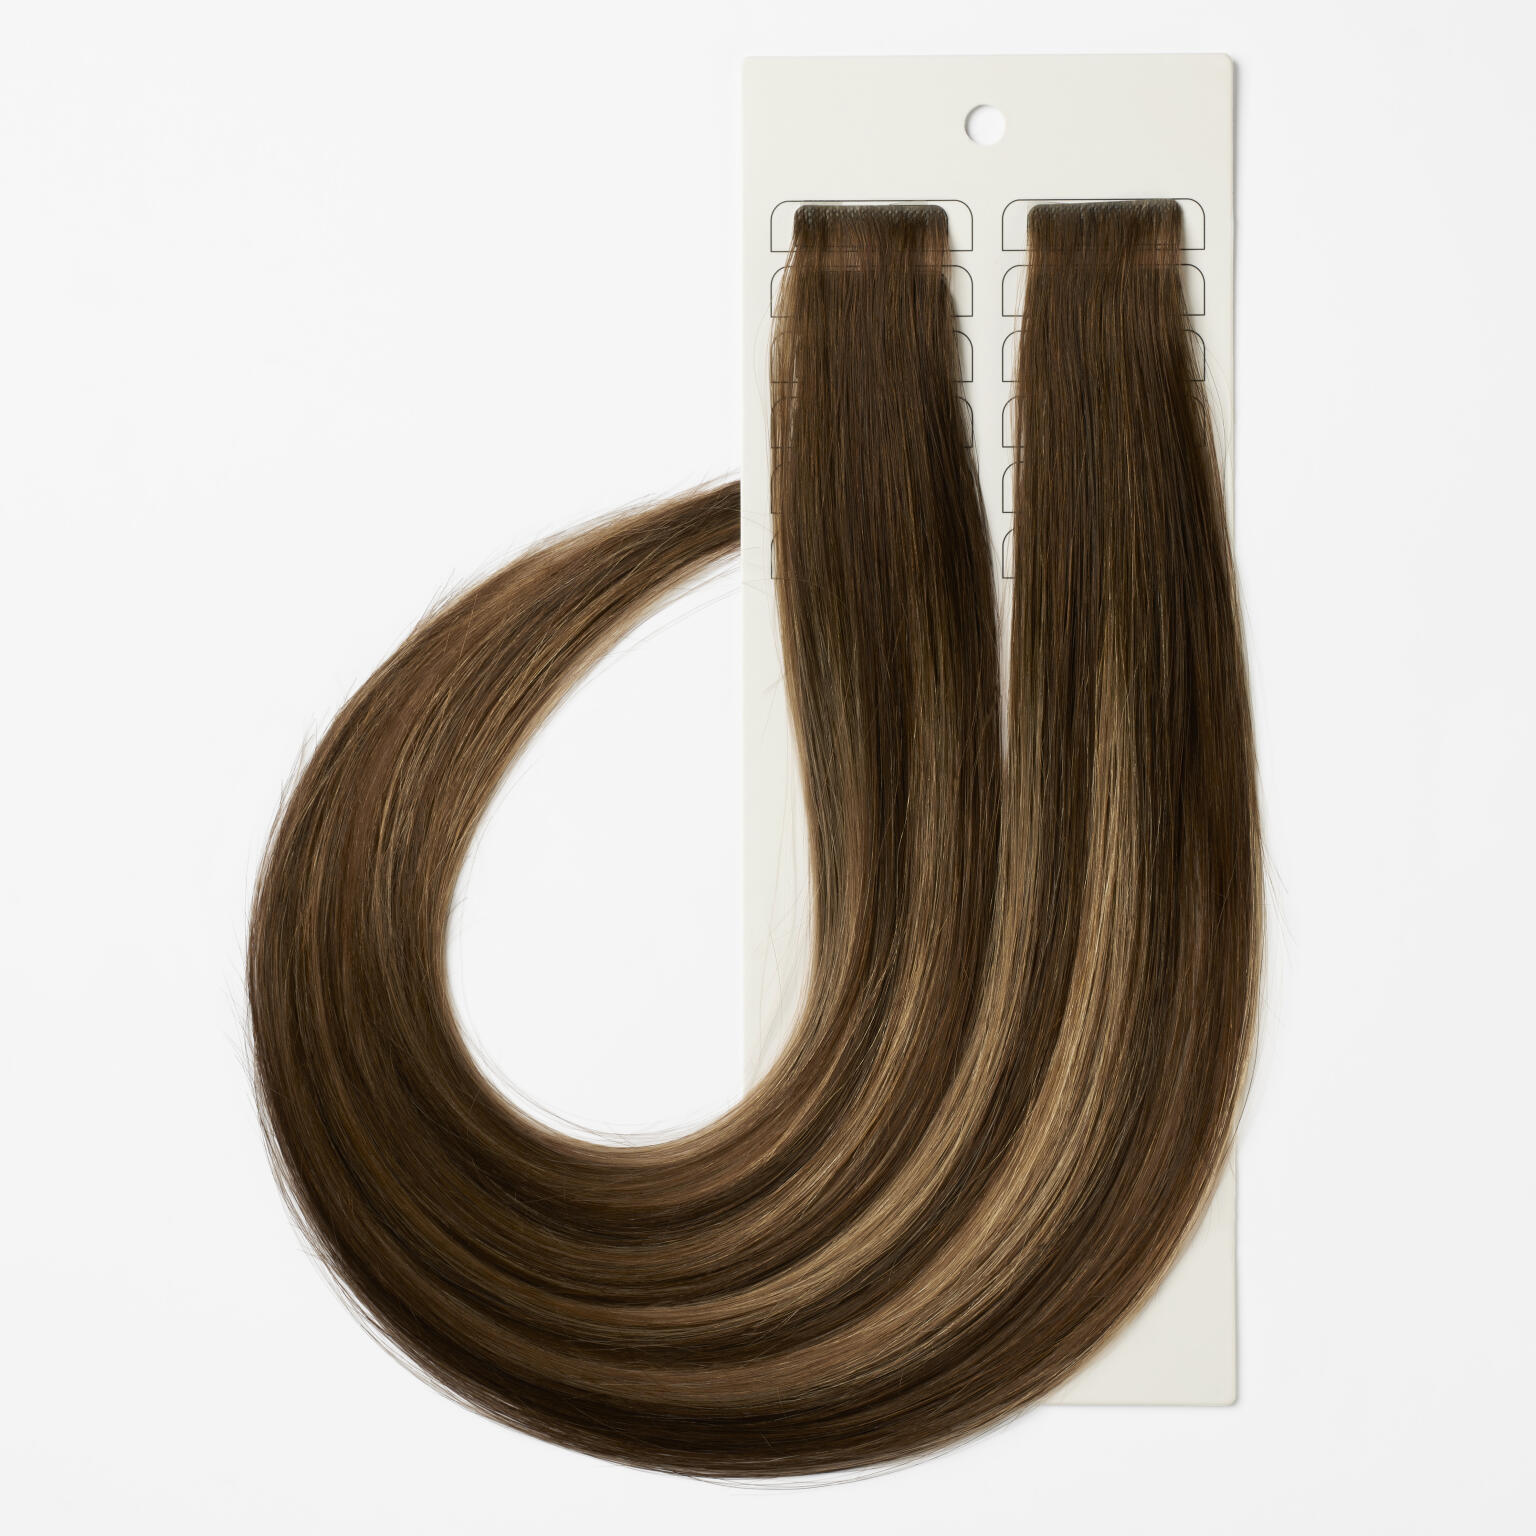 Luxe Tape Extensions Seamless 3 CM4.63/7.0 60 cm